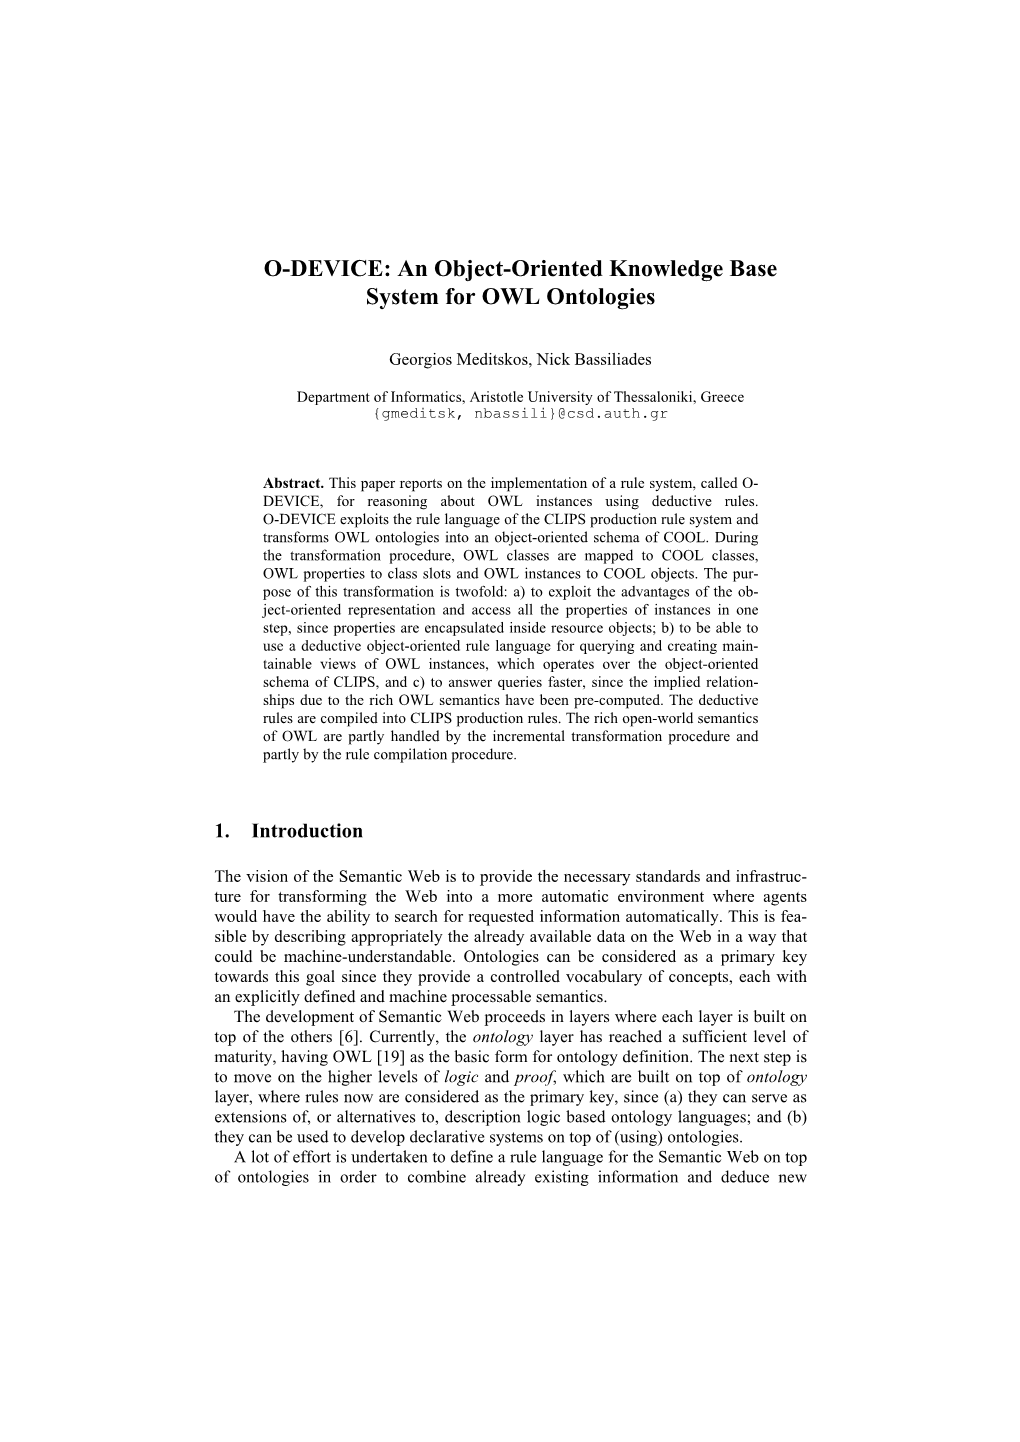 O-DEVICE: an Object-Oriented Knowledge Base System for OWL Ontologies